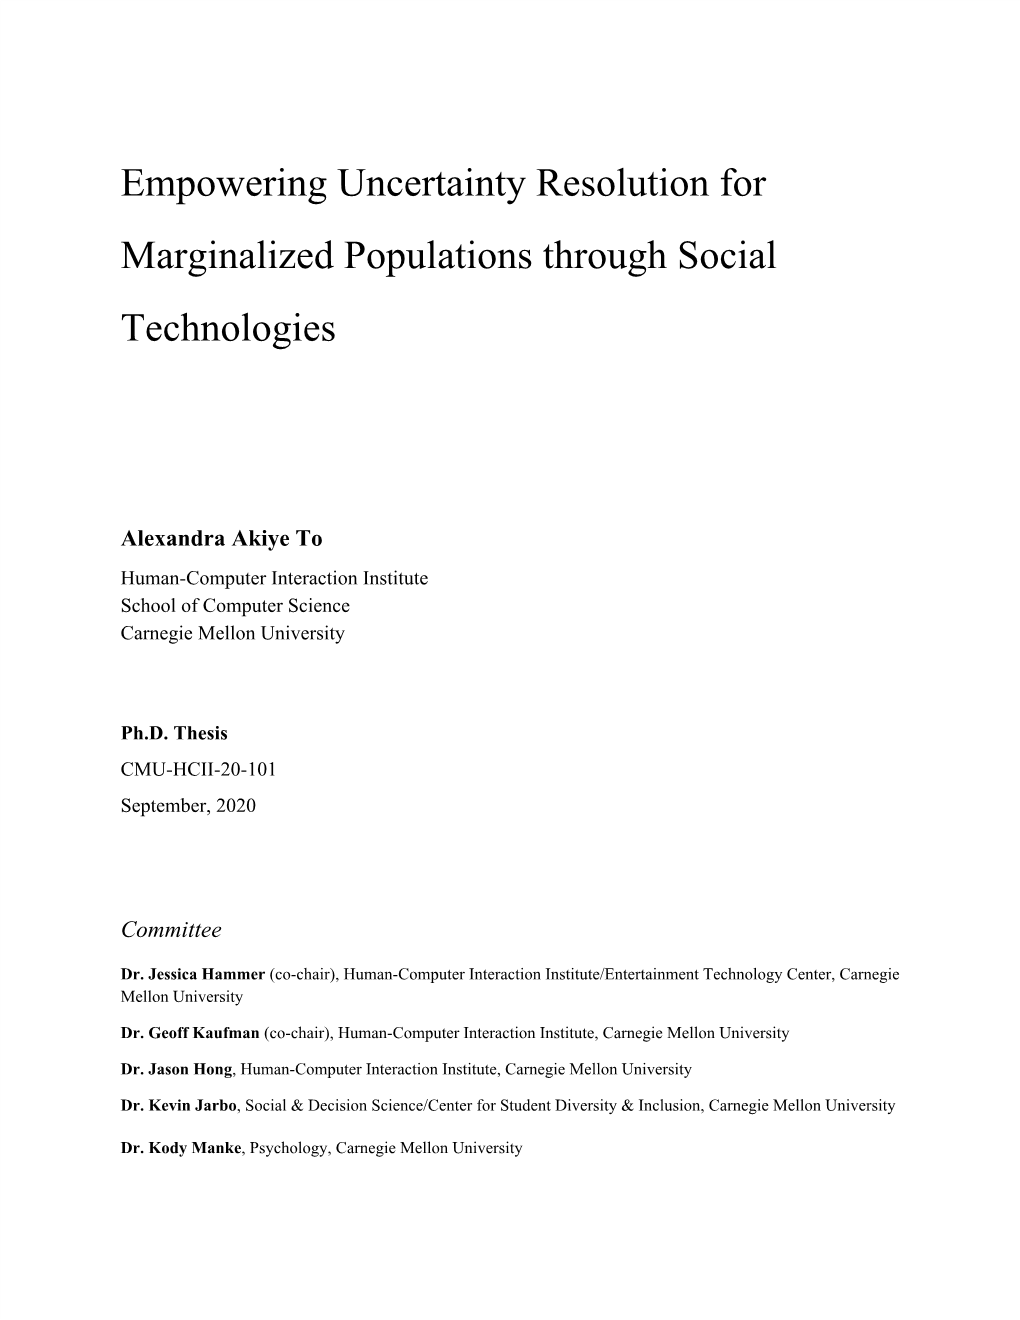 Empowering Uncertainty Resolution for Marginalized Populations Through Social Technologies